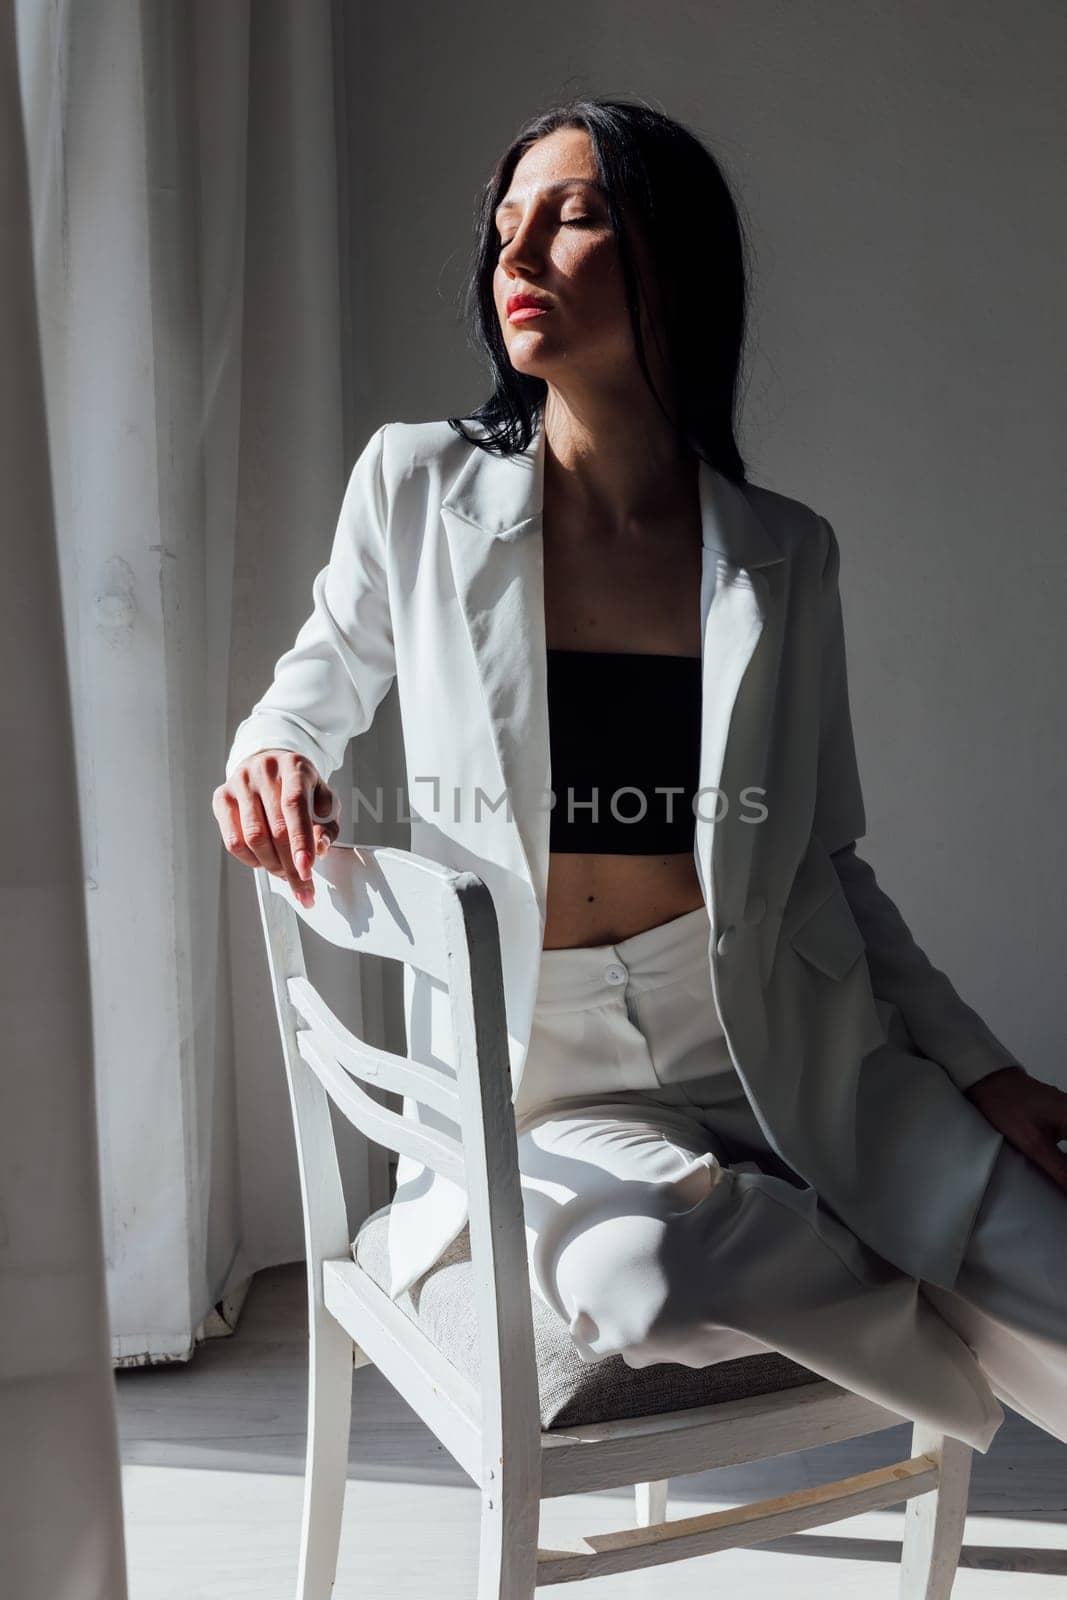 fashionable slender brunette woman sitting on a chair